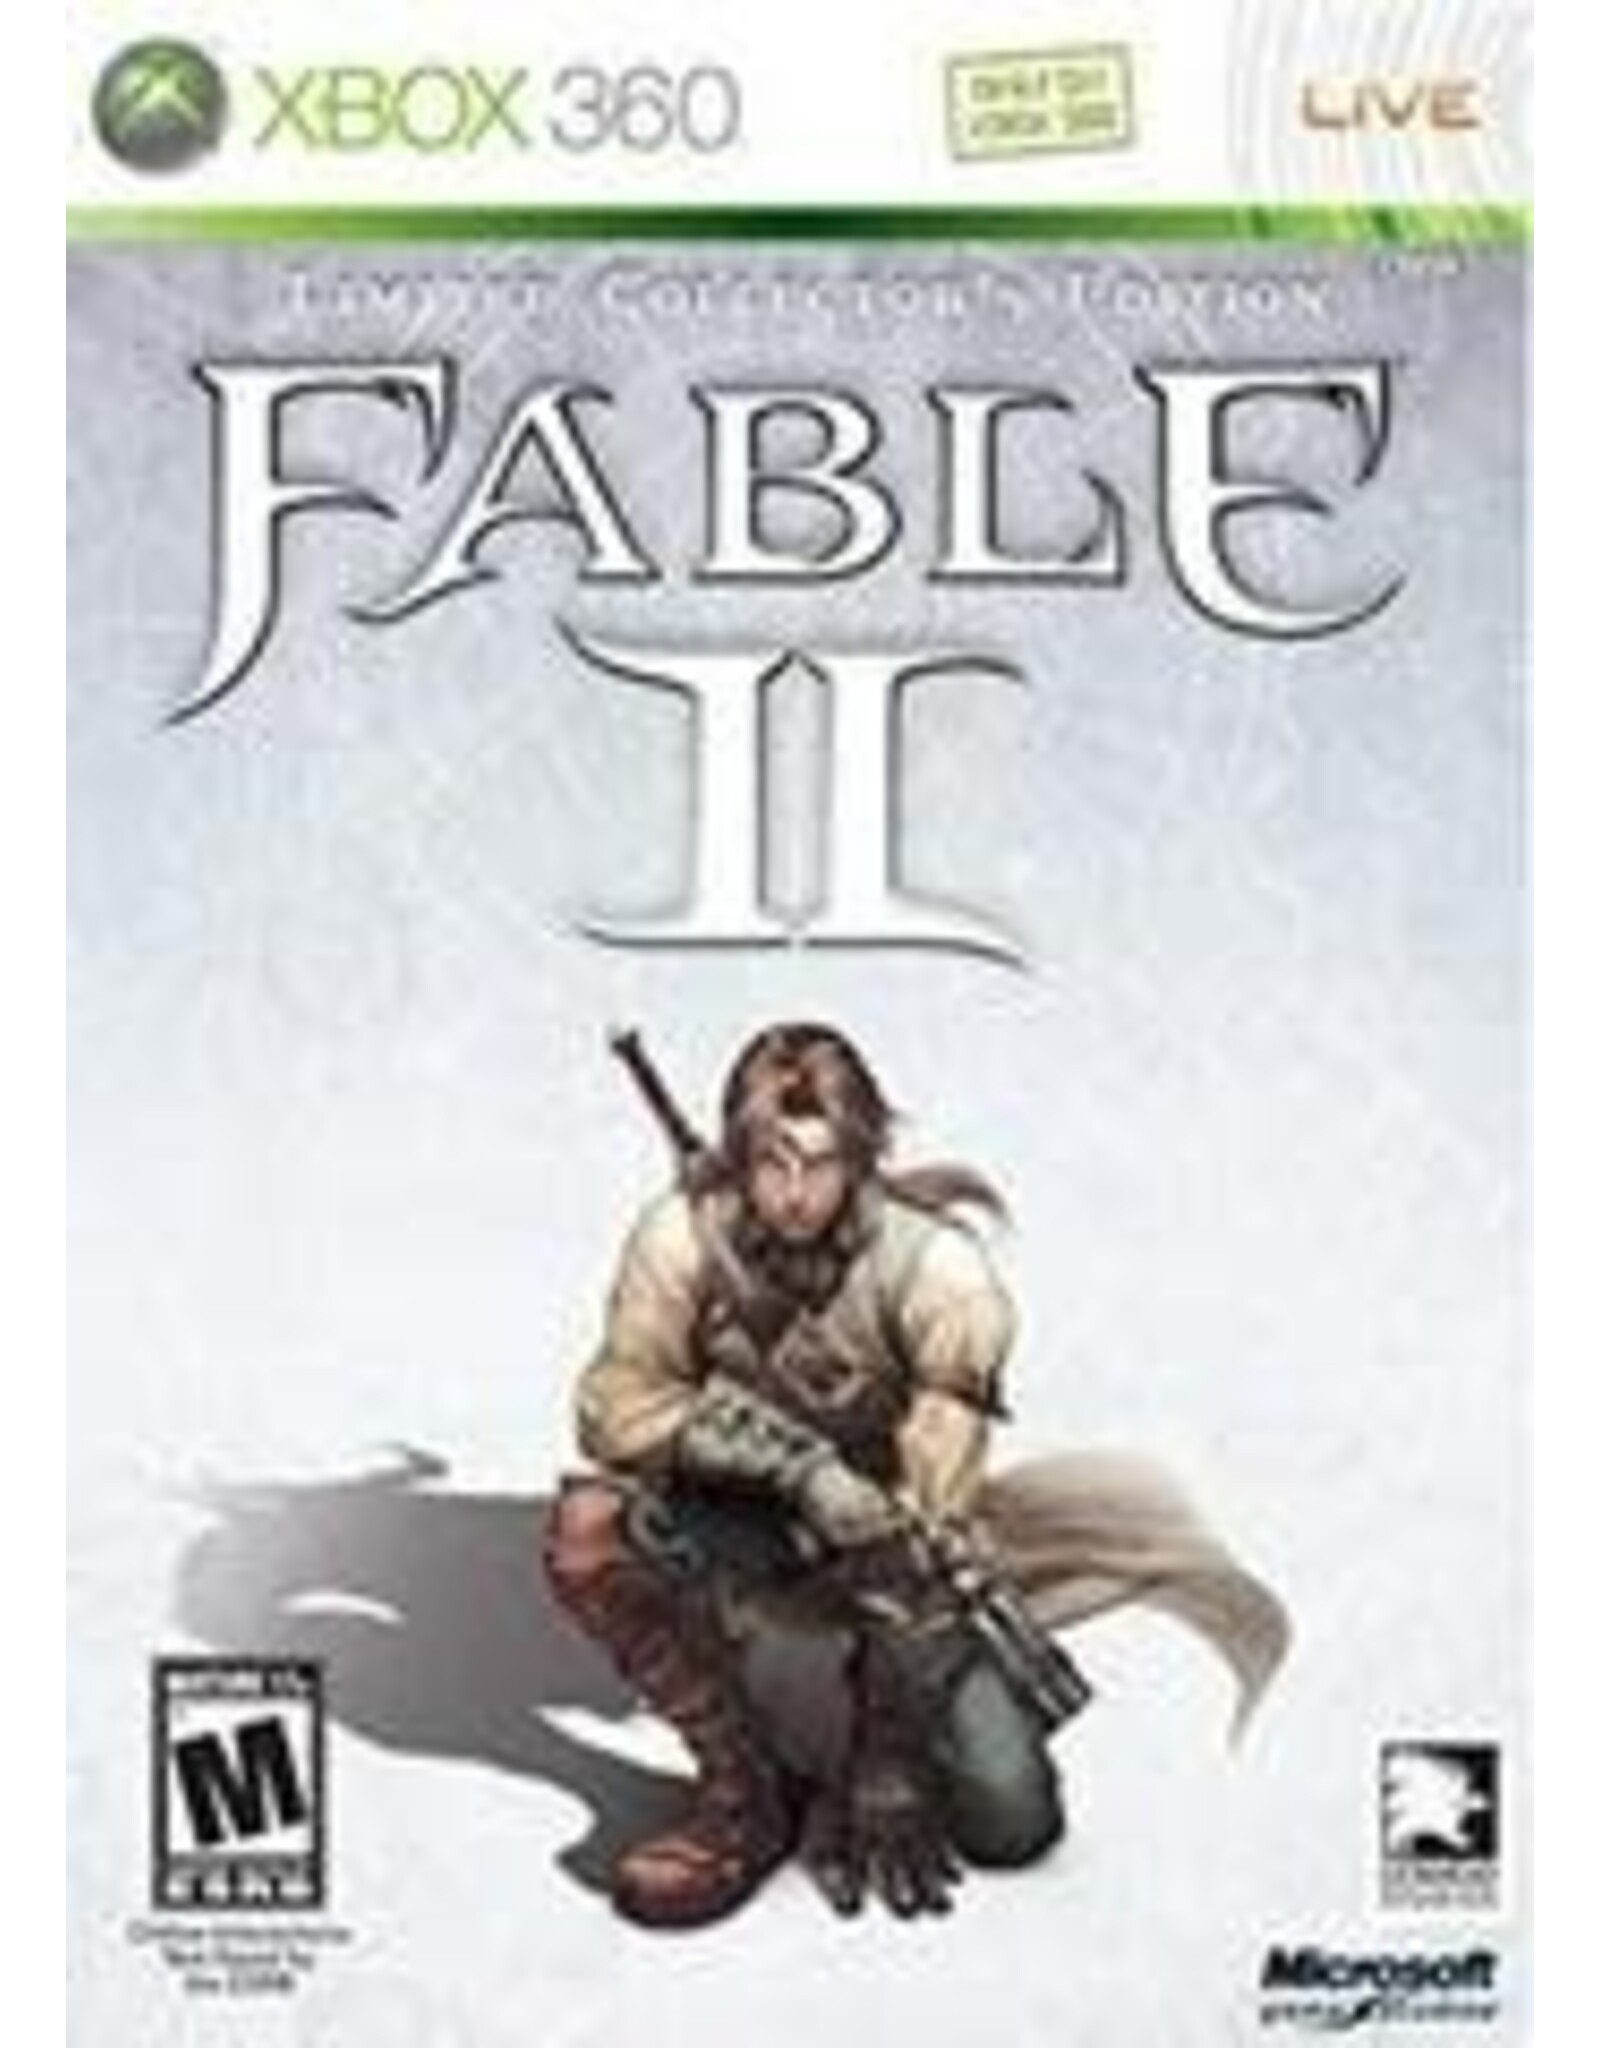 Xbox 360 Fable II Limited Collector's Edition - No Slipcover (Used)